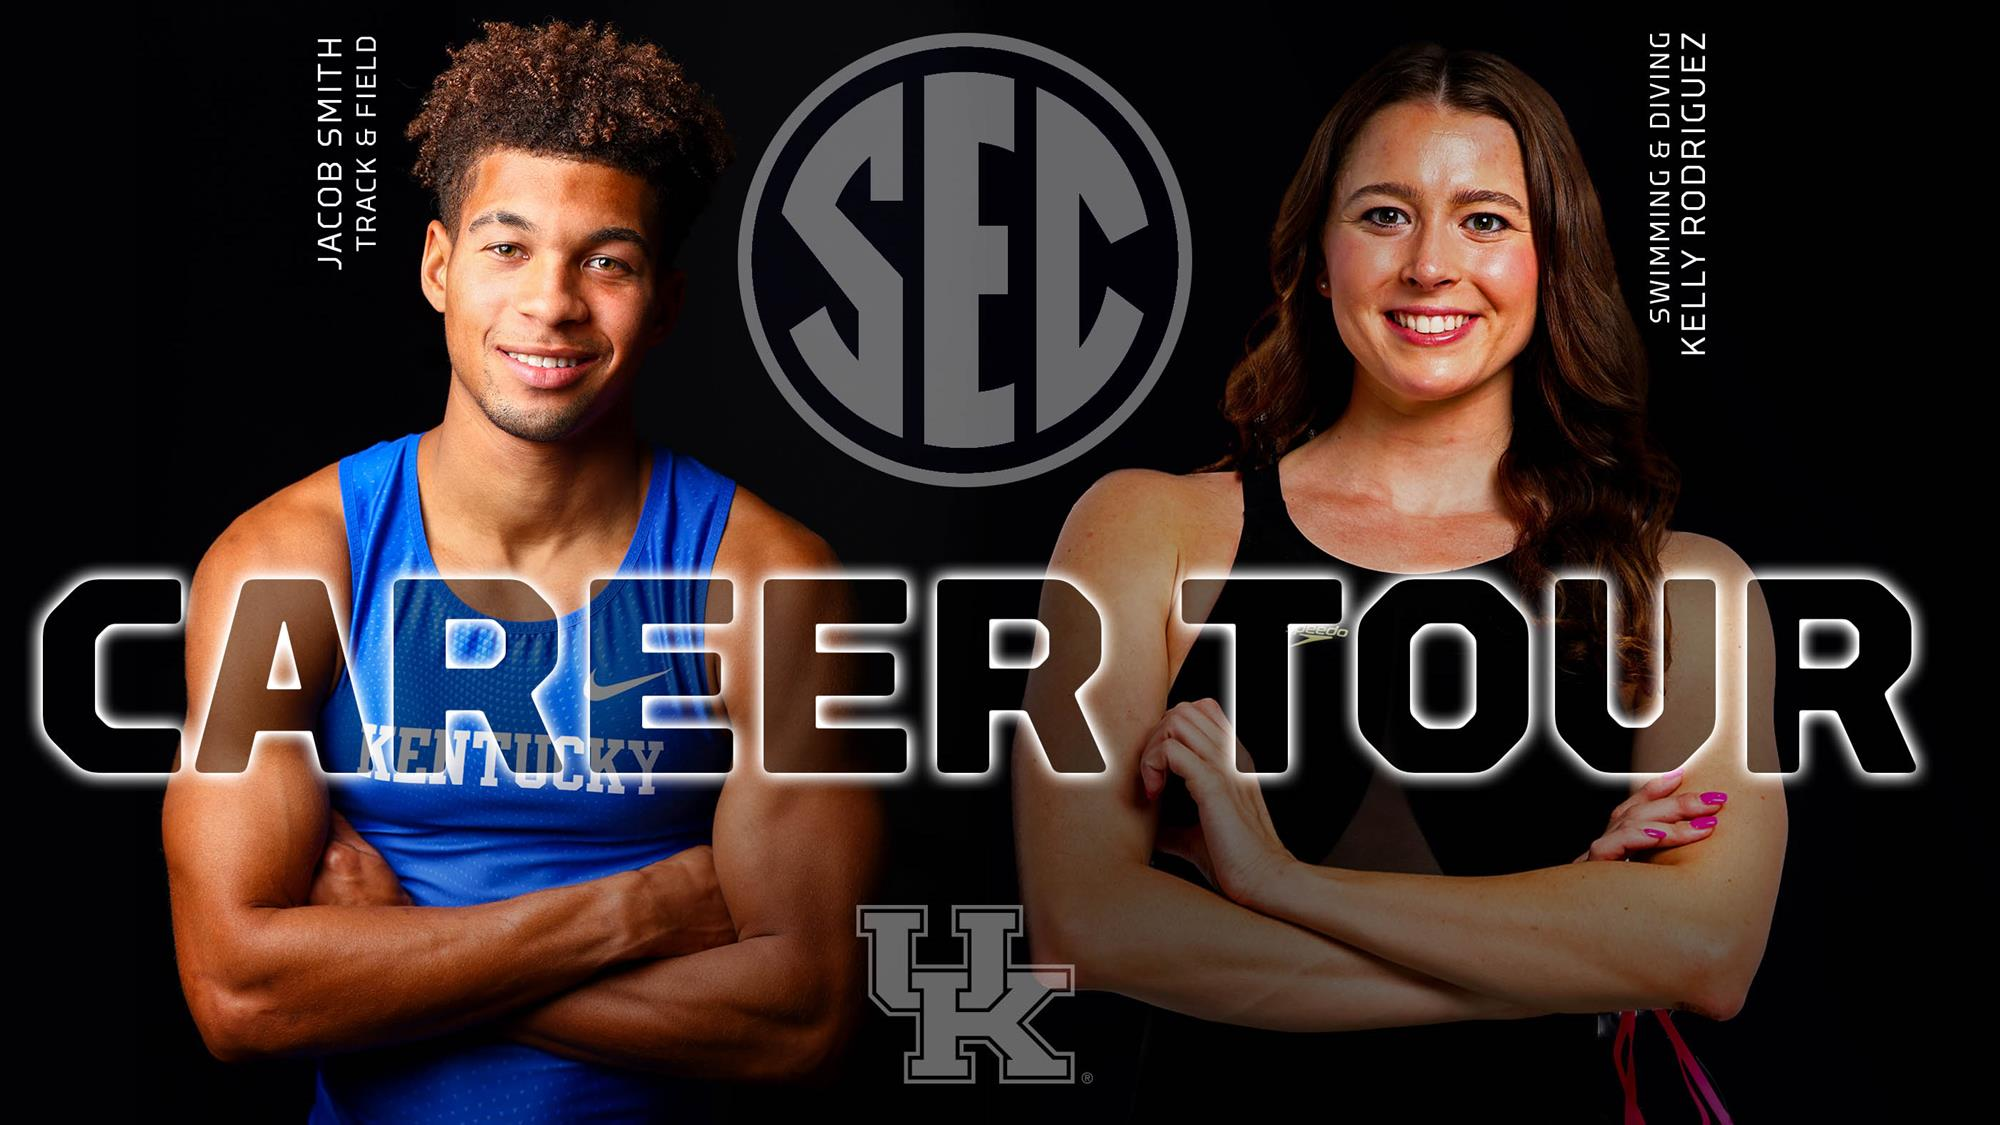 Kelly Rodriguez, Jacob Smith to Participate in SEC Career Tour